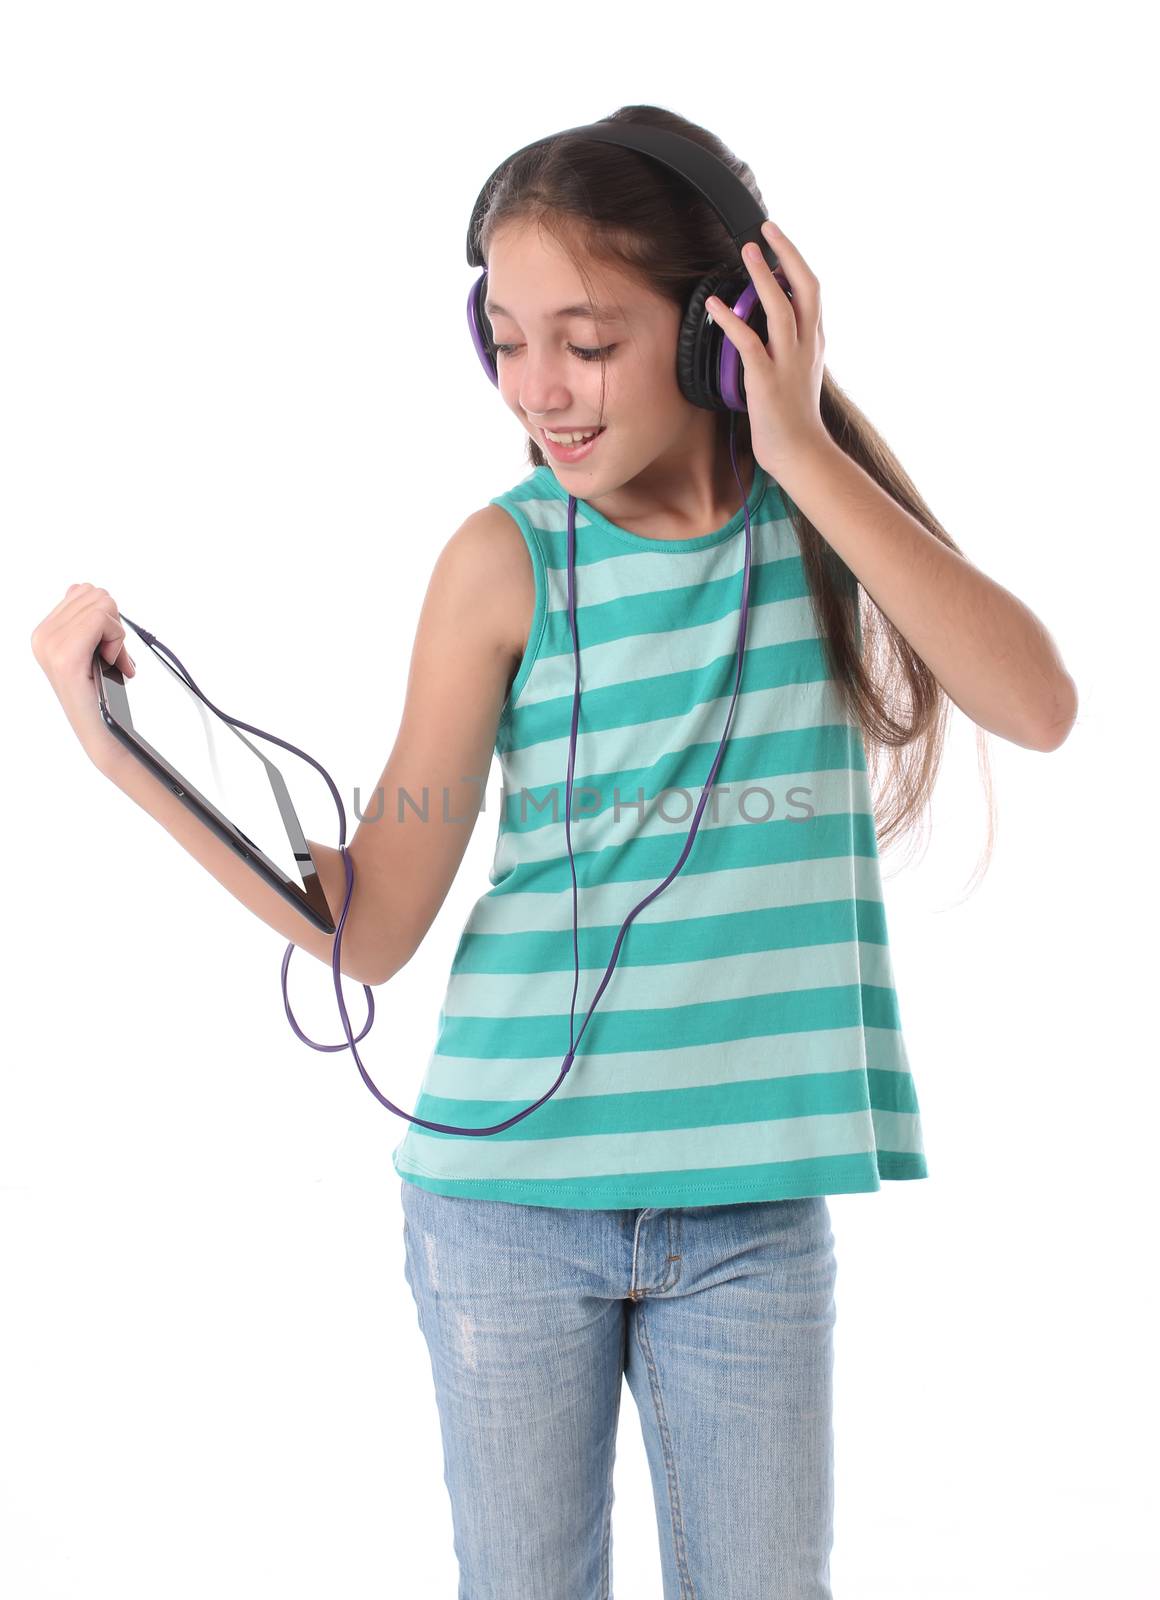 Beautiful pre-teen girl using a tablet computer and headphones. by Erdosain